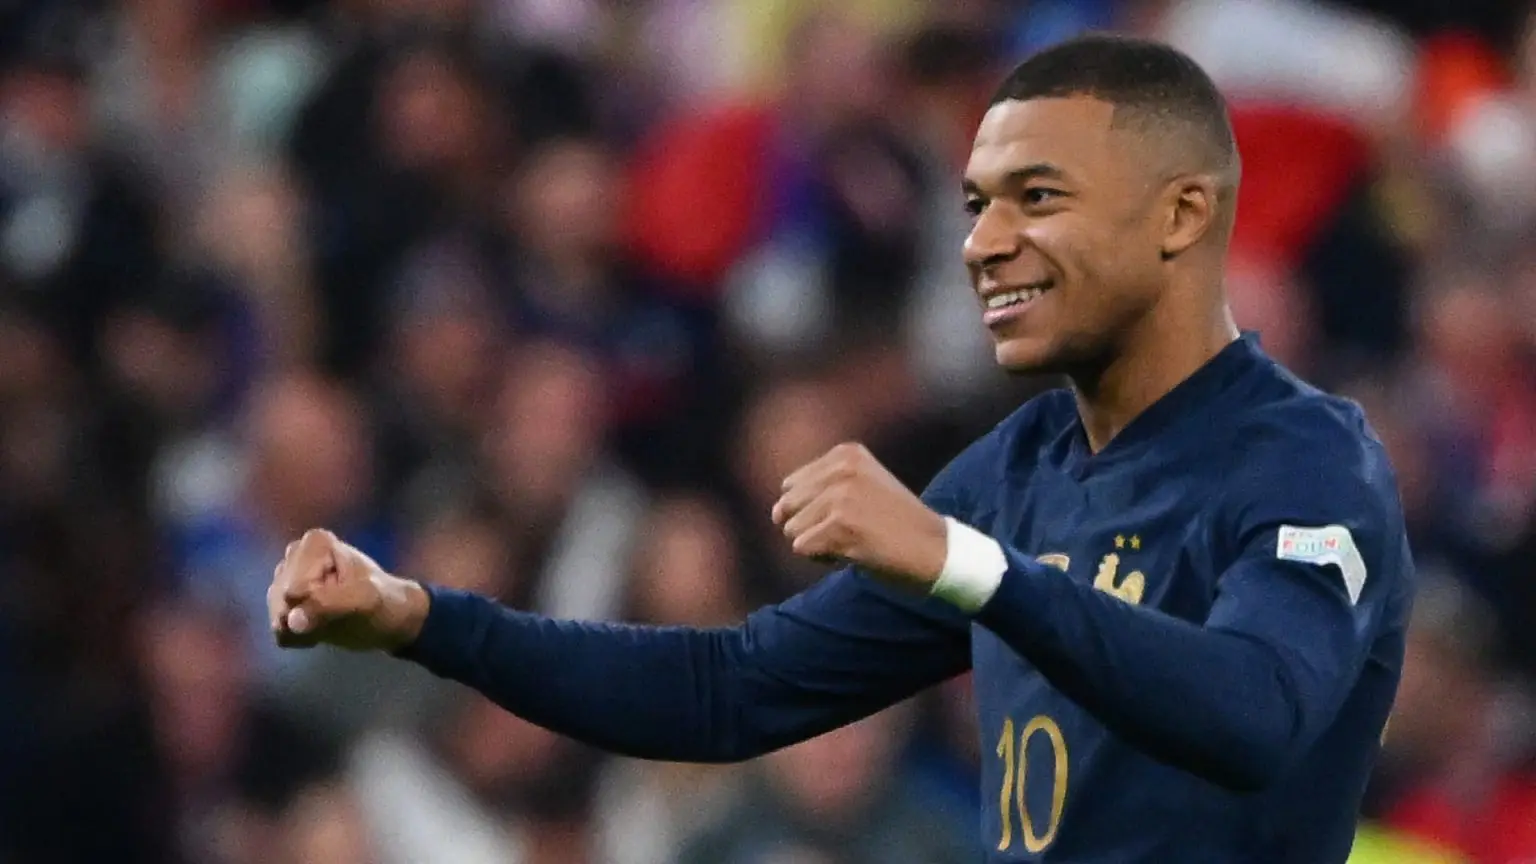 Transfer: What Vinicius, Bellingham said about Mbappe coming to Real Madrid